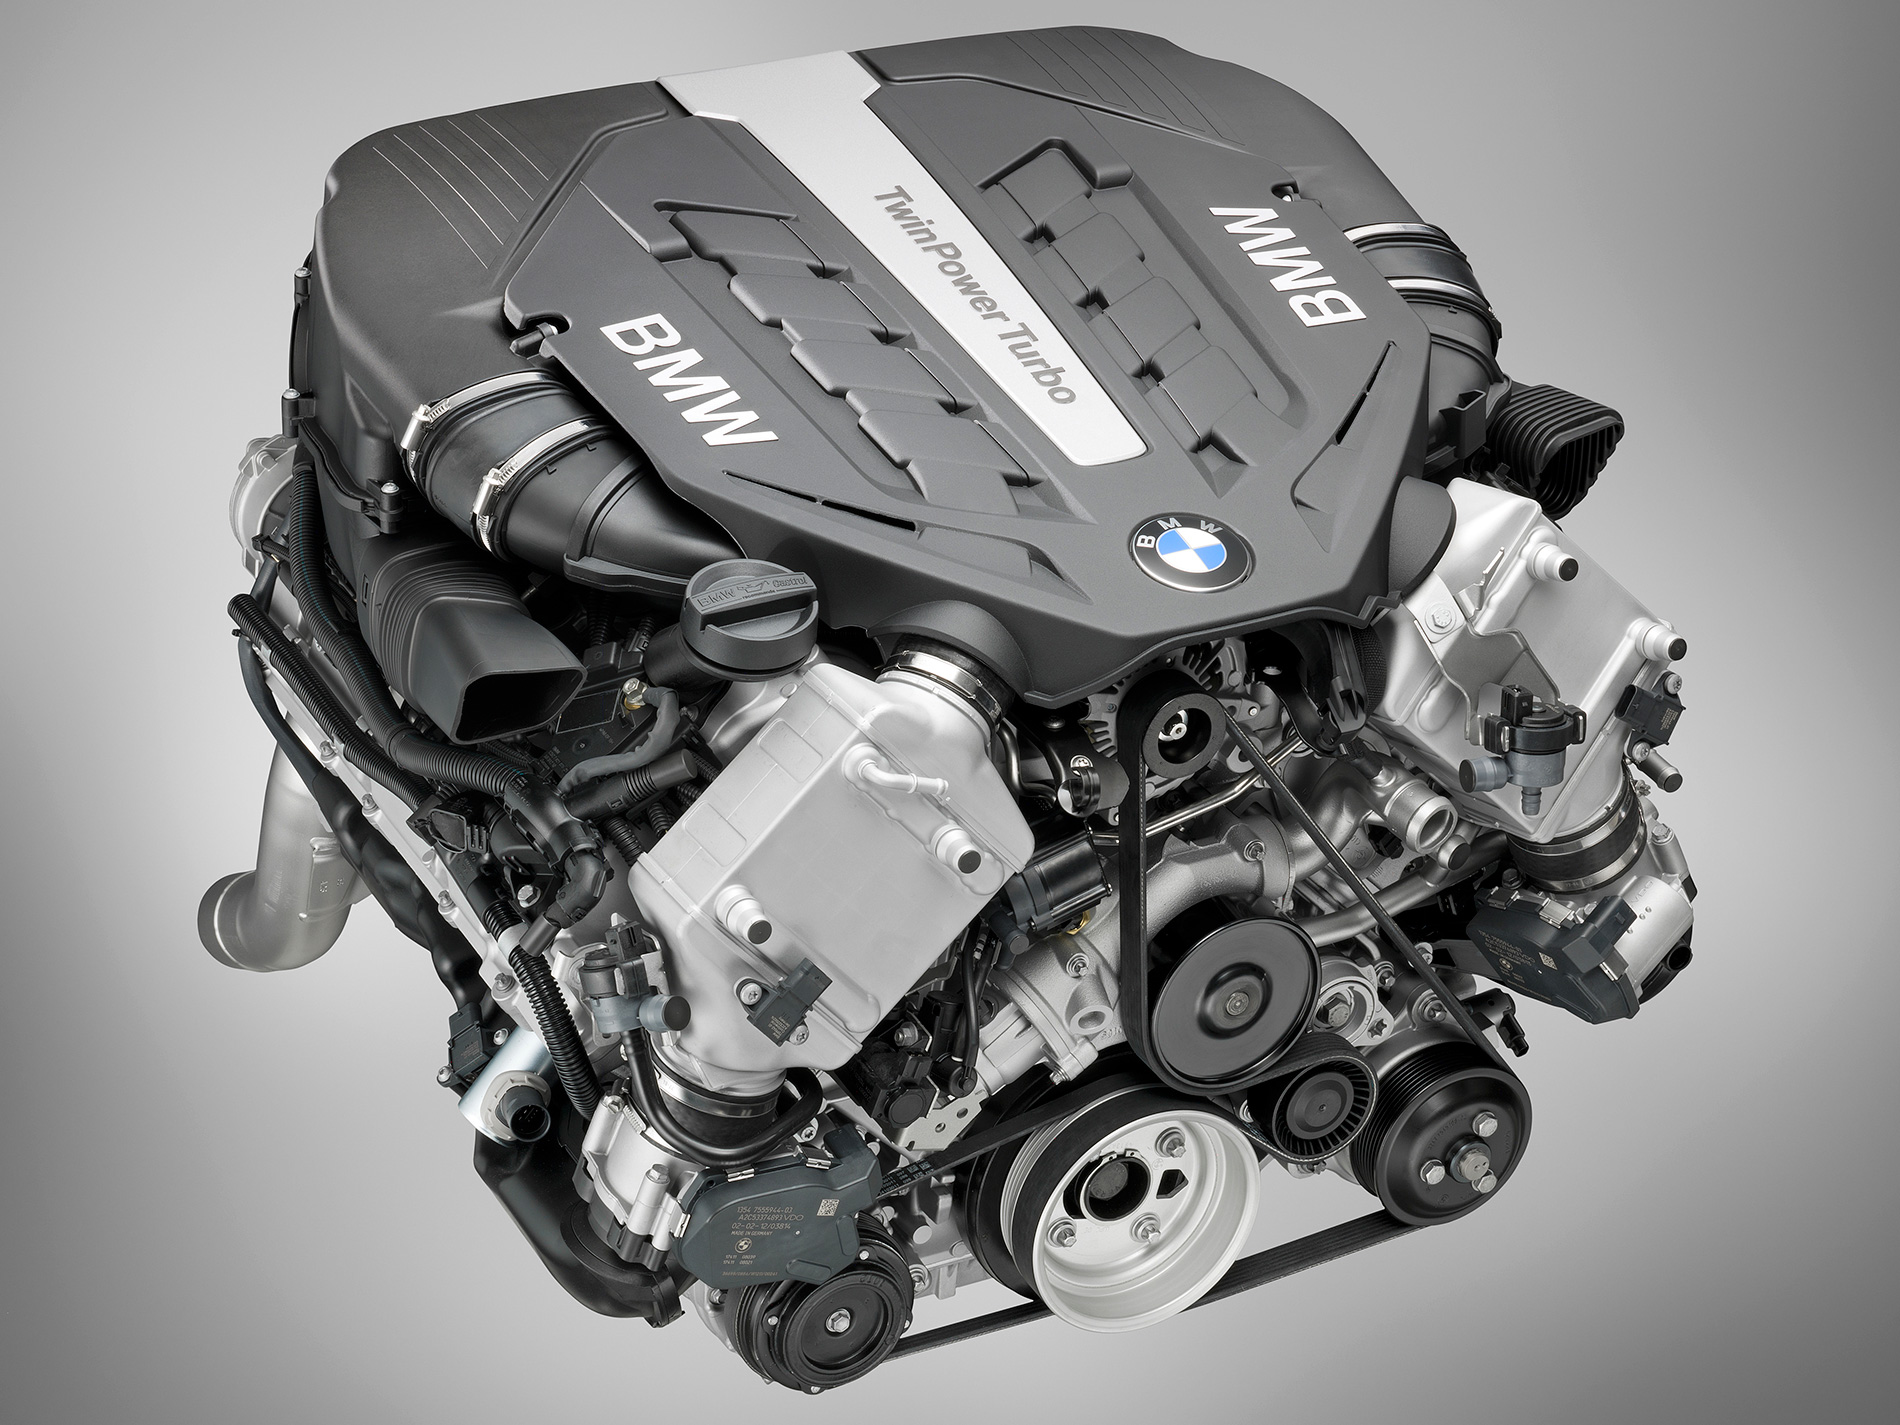 How long do BMW engines last?